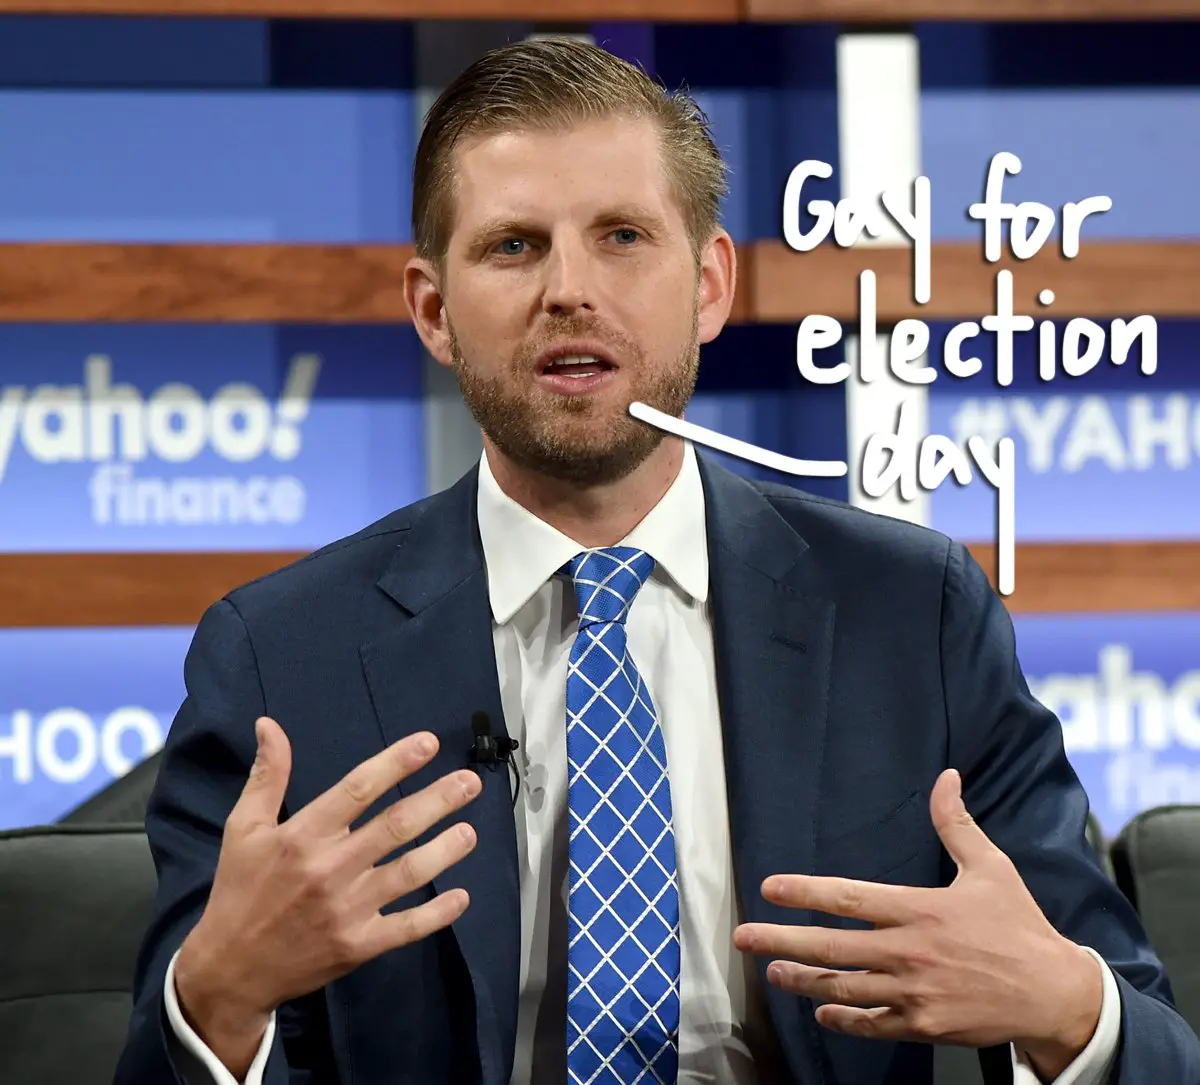 Did Eric Trump Just Come Out As LGBT On Fox News?!